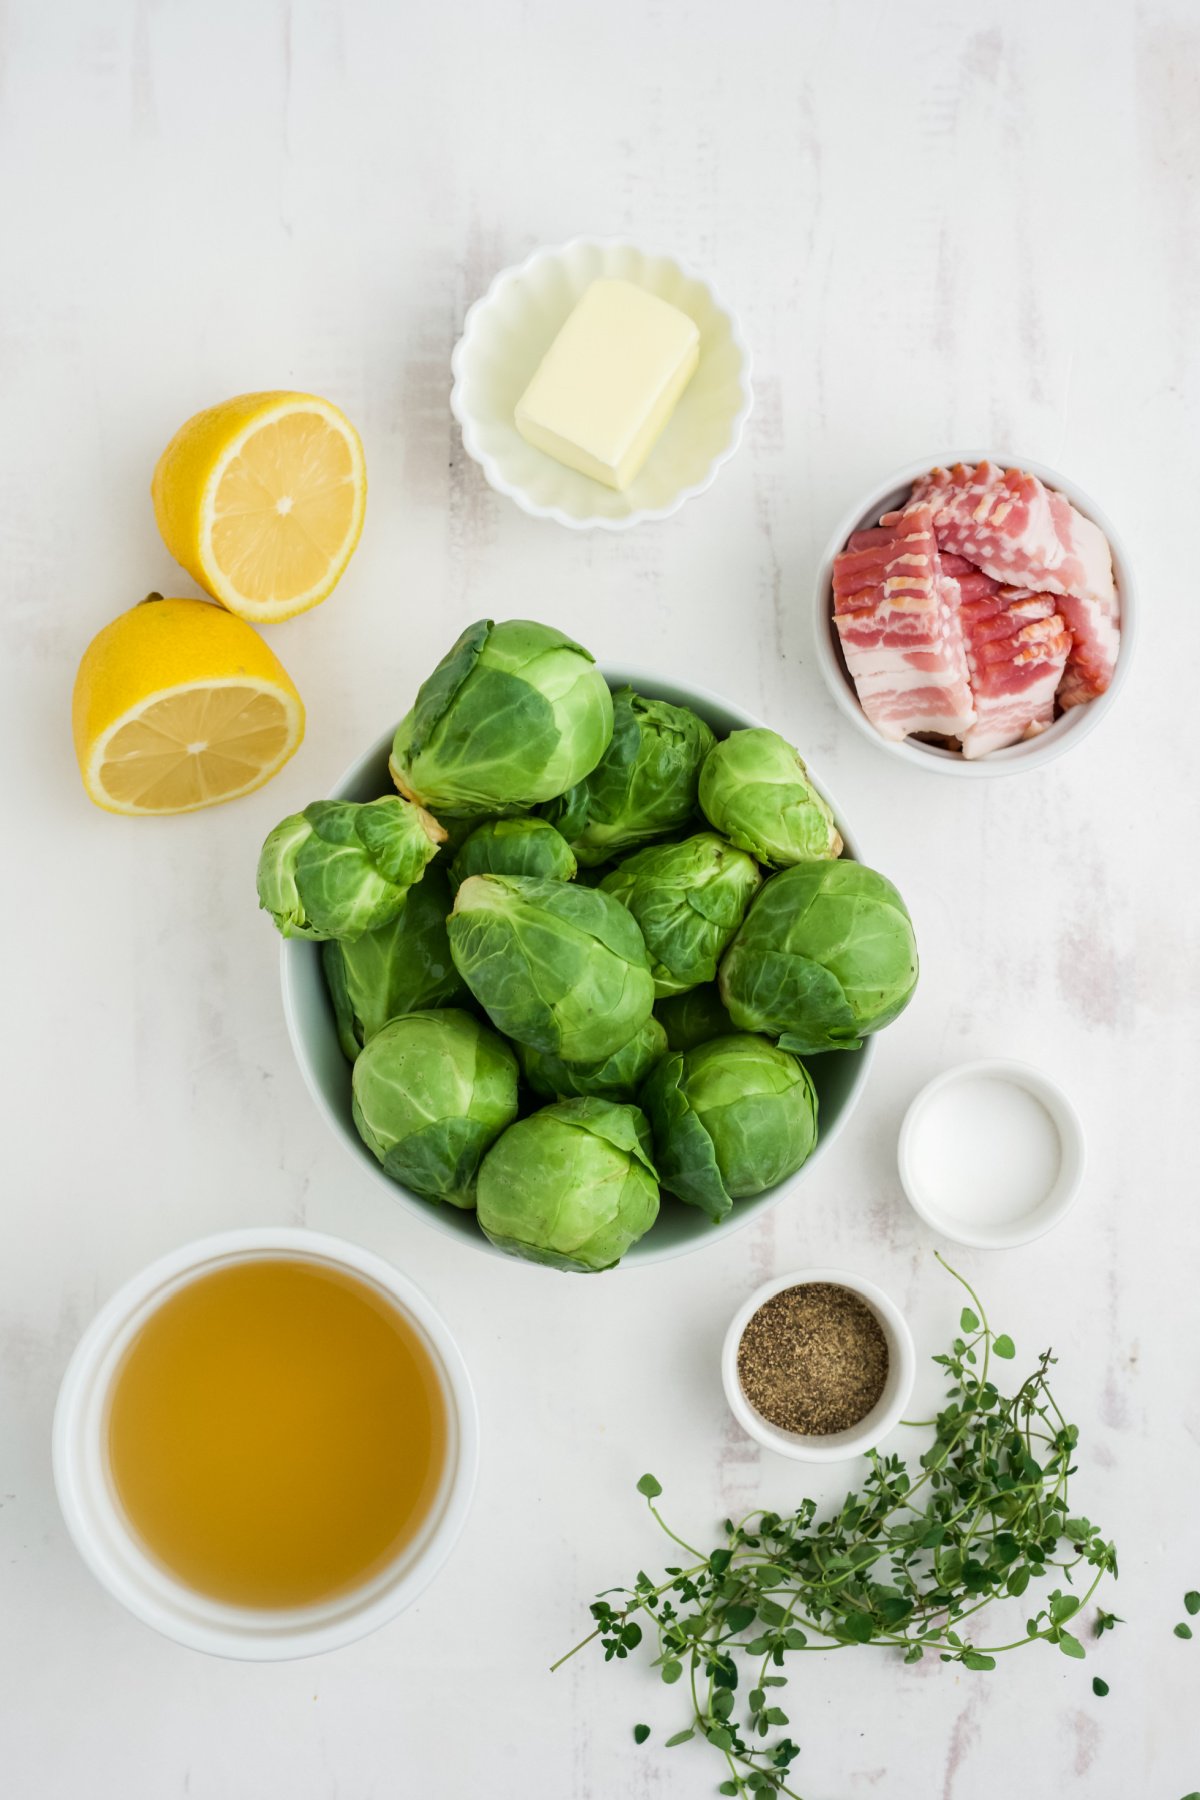 Ingredients to make crockpot Brussels sprouts on the table before preparing.